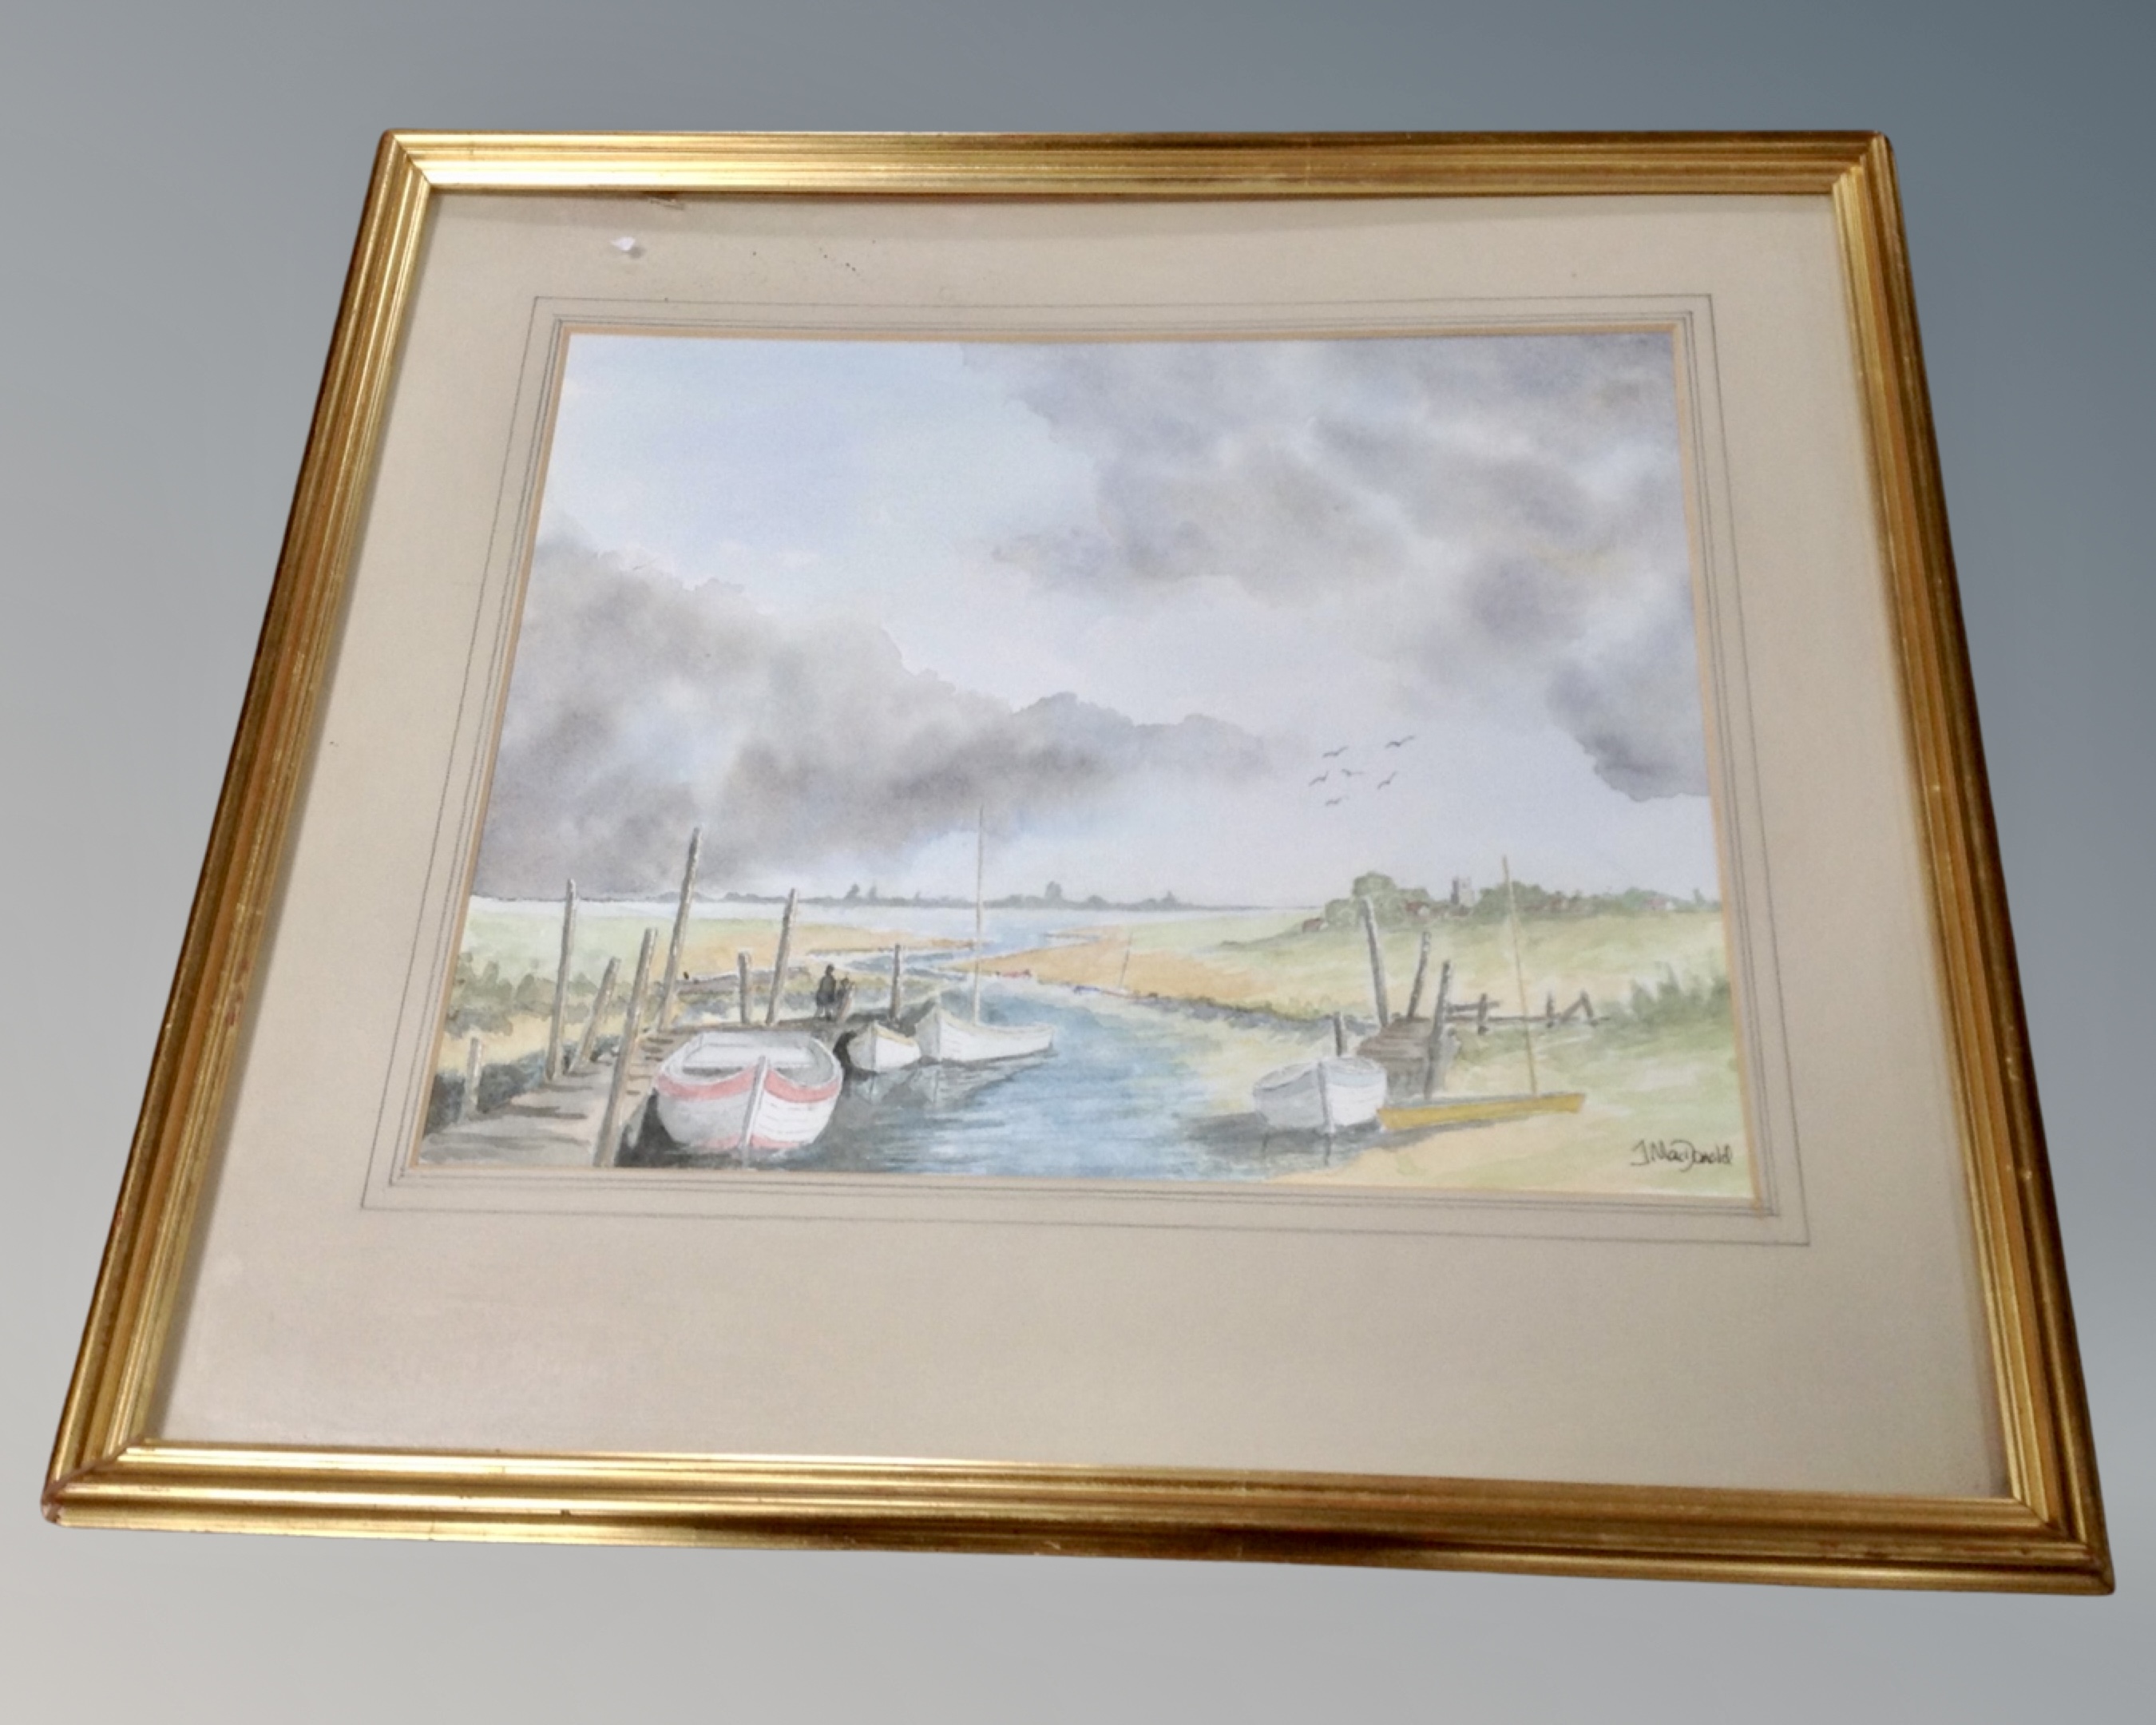 J. Macdonald : Boats in an estuary, watercolour, in gilt frame and mount.